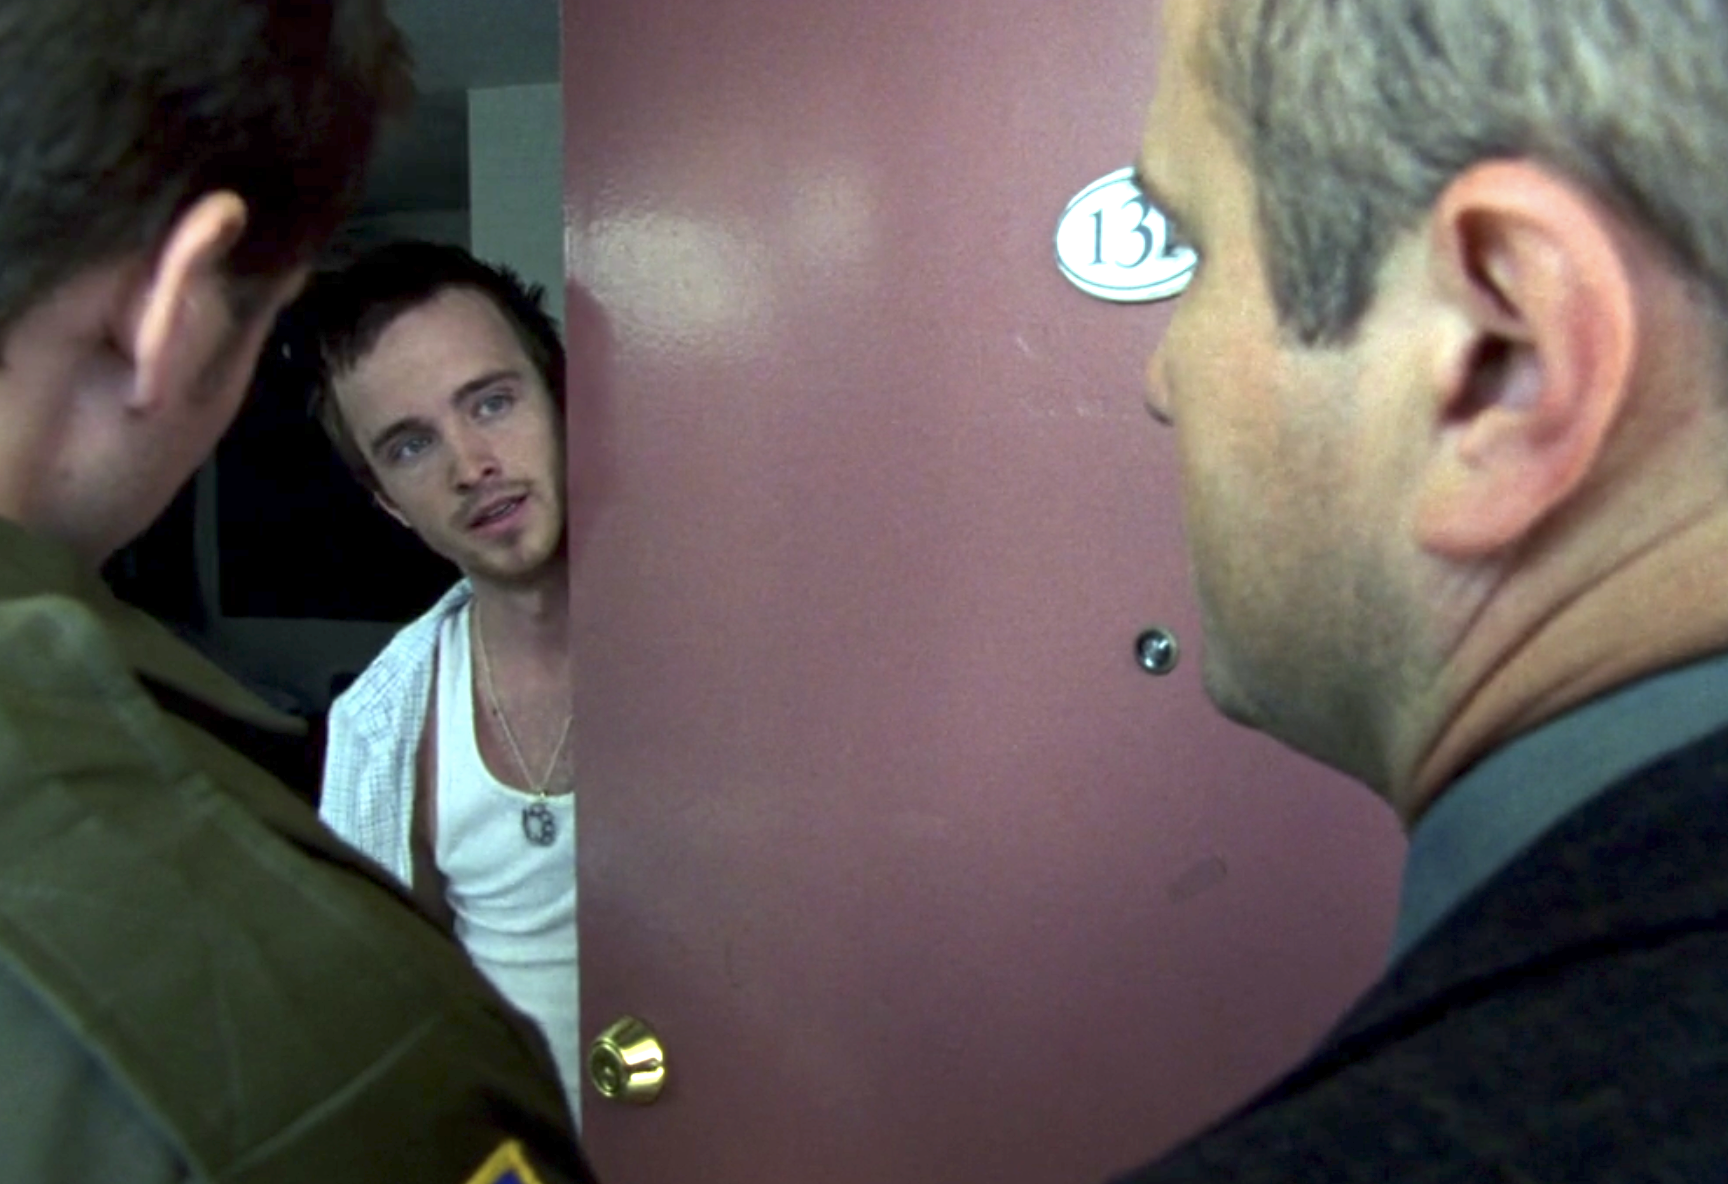 Screenshot of S1E11 of Veronica Mars. Aaron Paul in a tank top and open button down shirt has opened the door slightly and is looking out at Sheriff Lamb and Keith